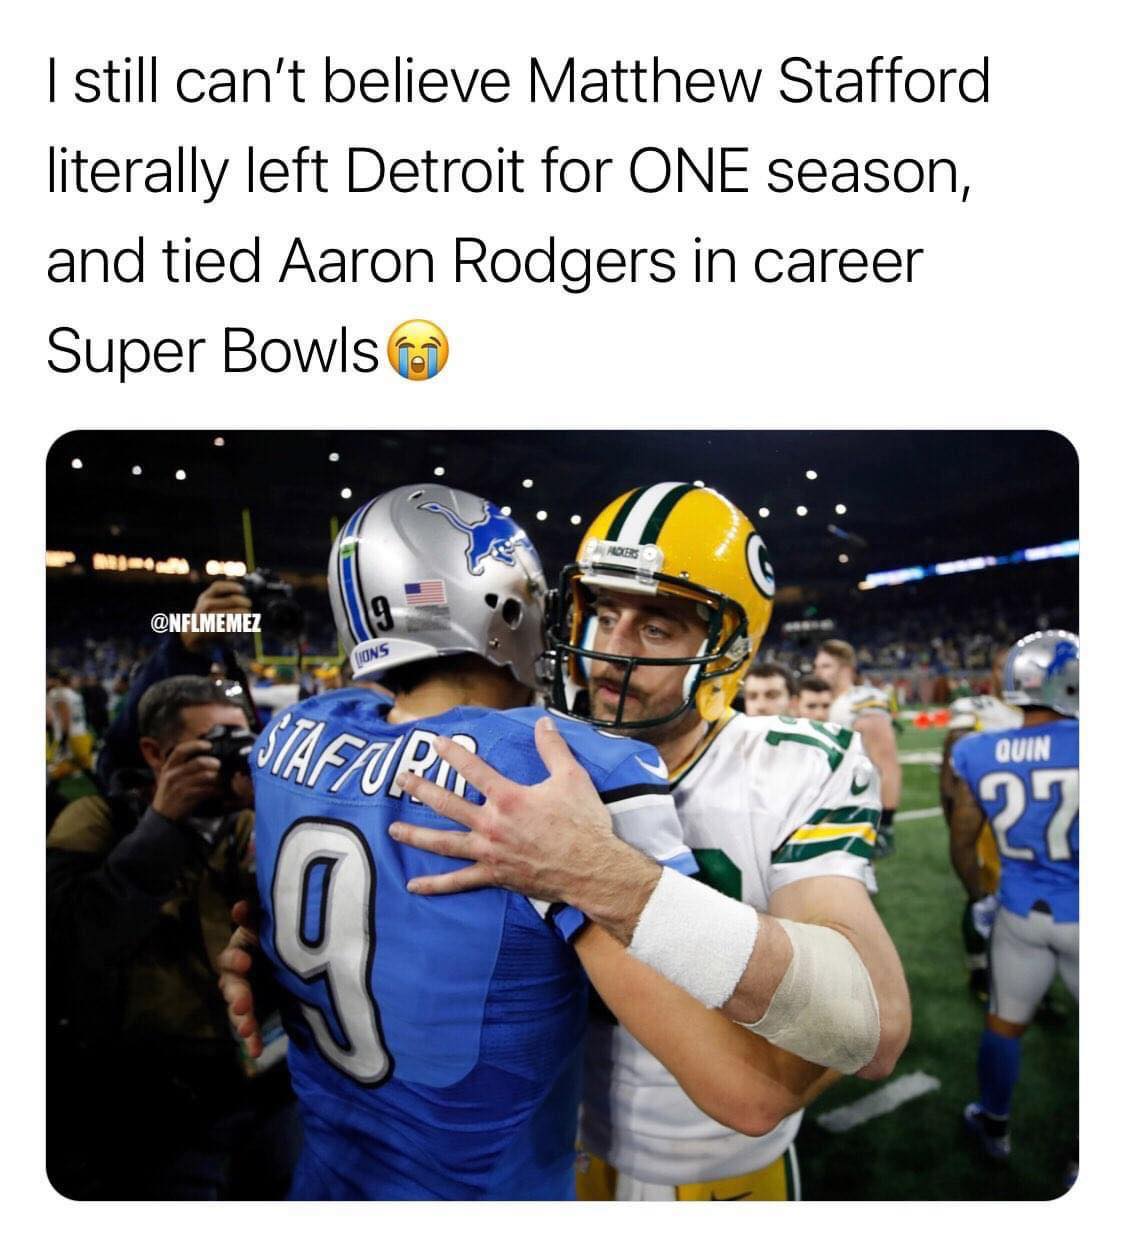 NFL football memes - team - I still can't believe Matthew Stafford literally left Detroit for One season, and tied Aaron Rodgers in career Super Bowls 9 Lions Staffor 9 Packers Quin 27